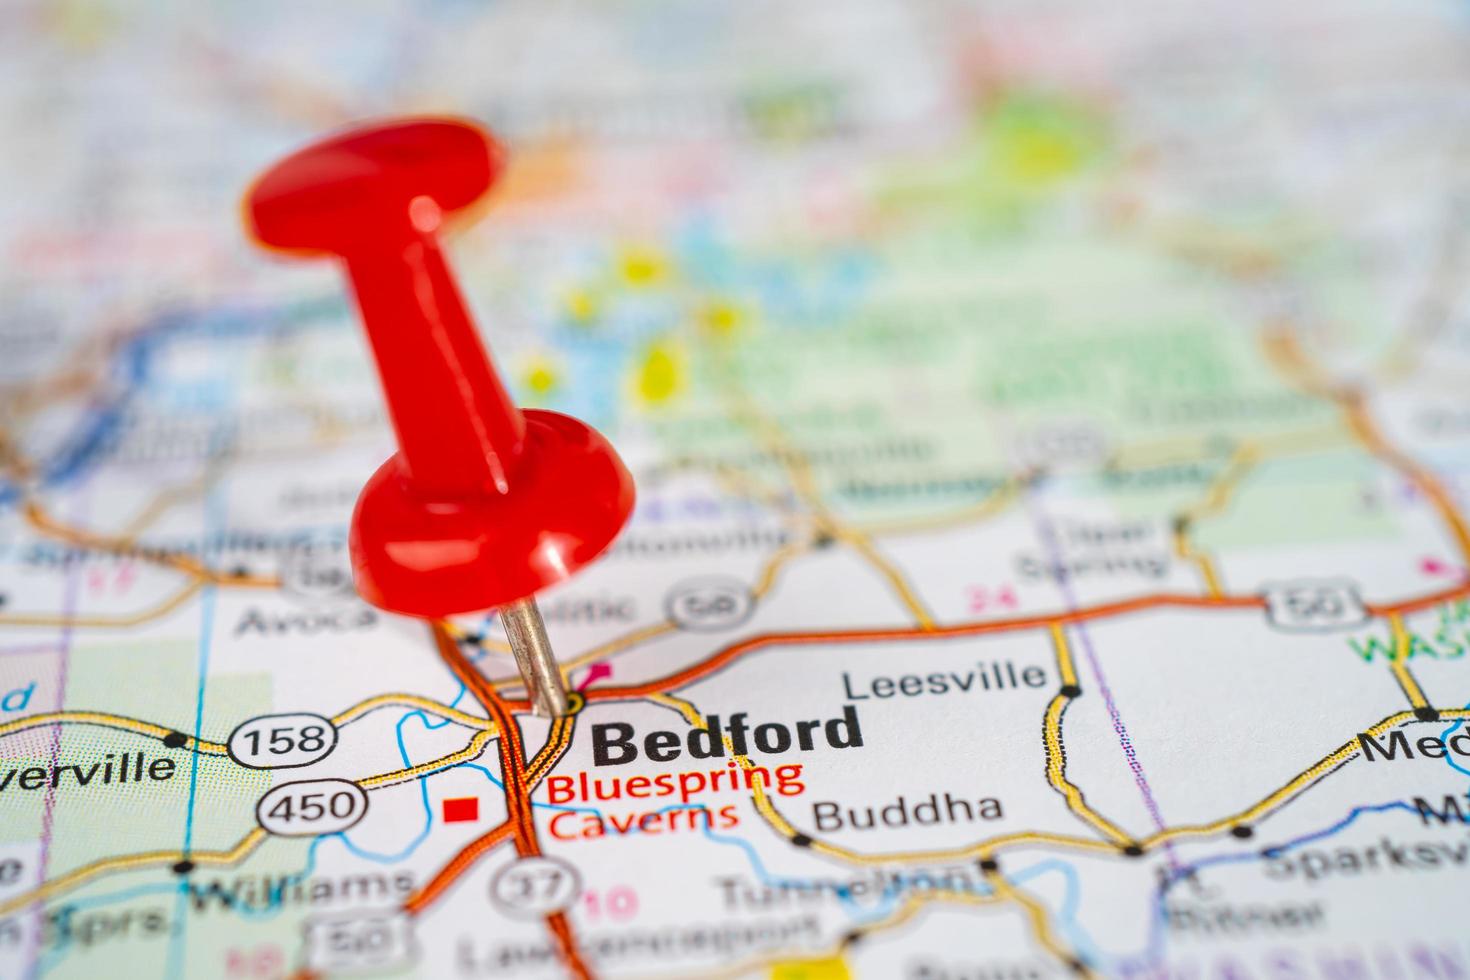 Bangkok, Thailand, June 1, 2020 Bedford, Middlesex County, Massachusetts, road map with red pushpin, city in the United States of America USA. photo